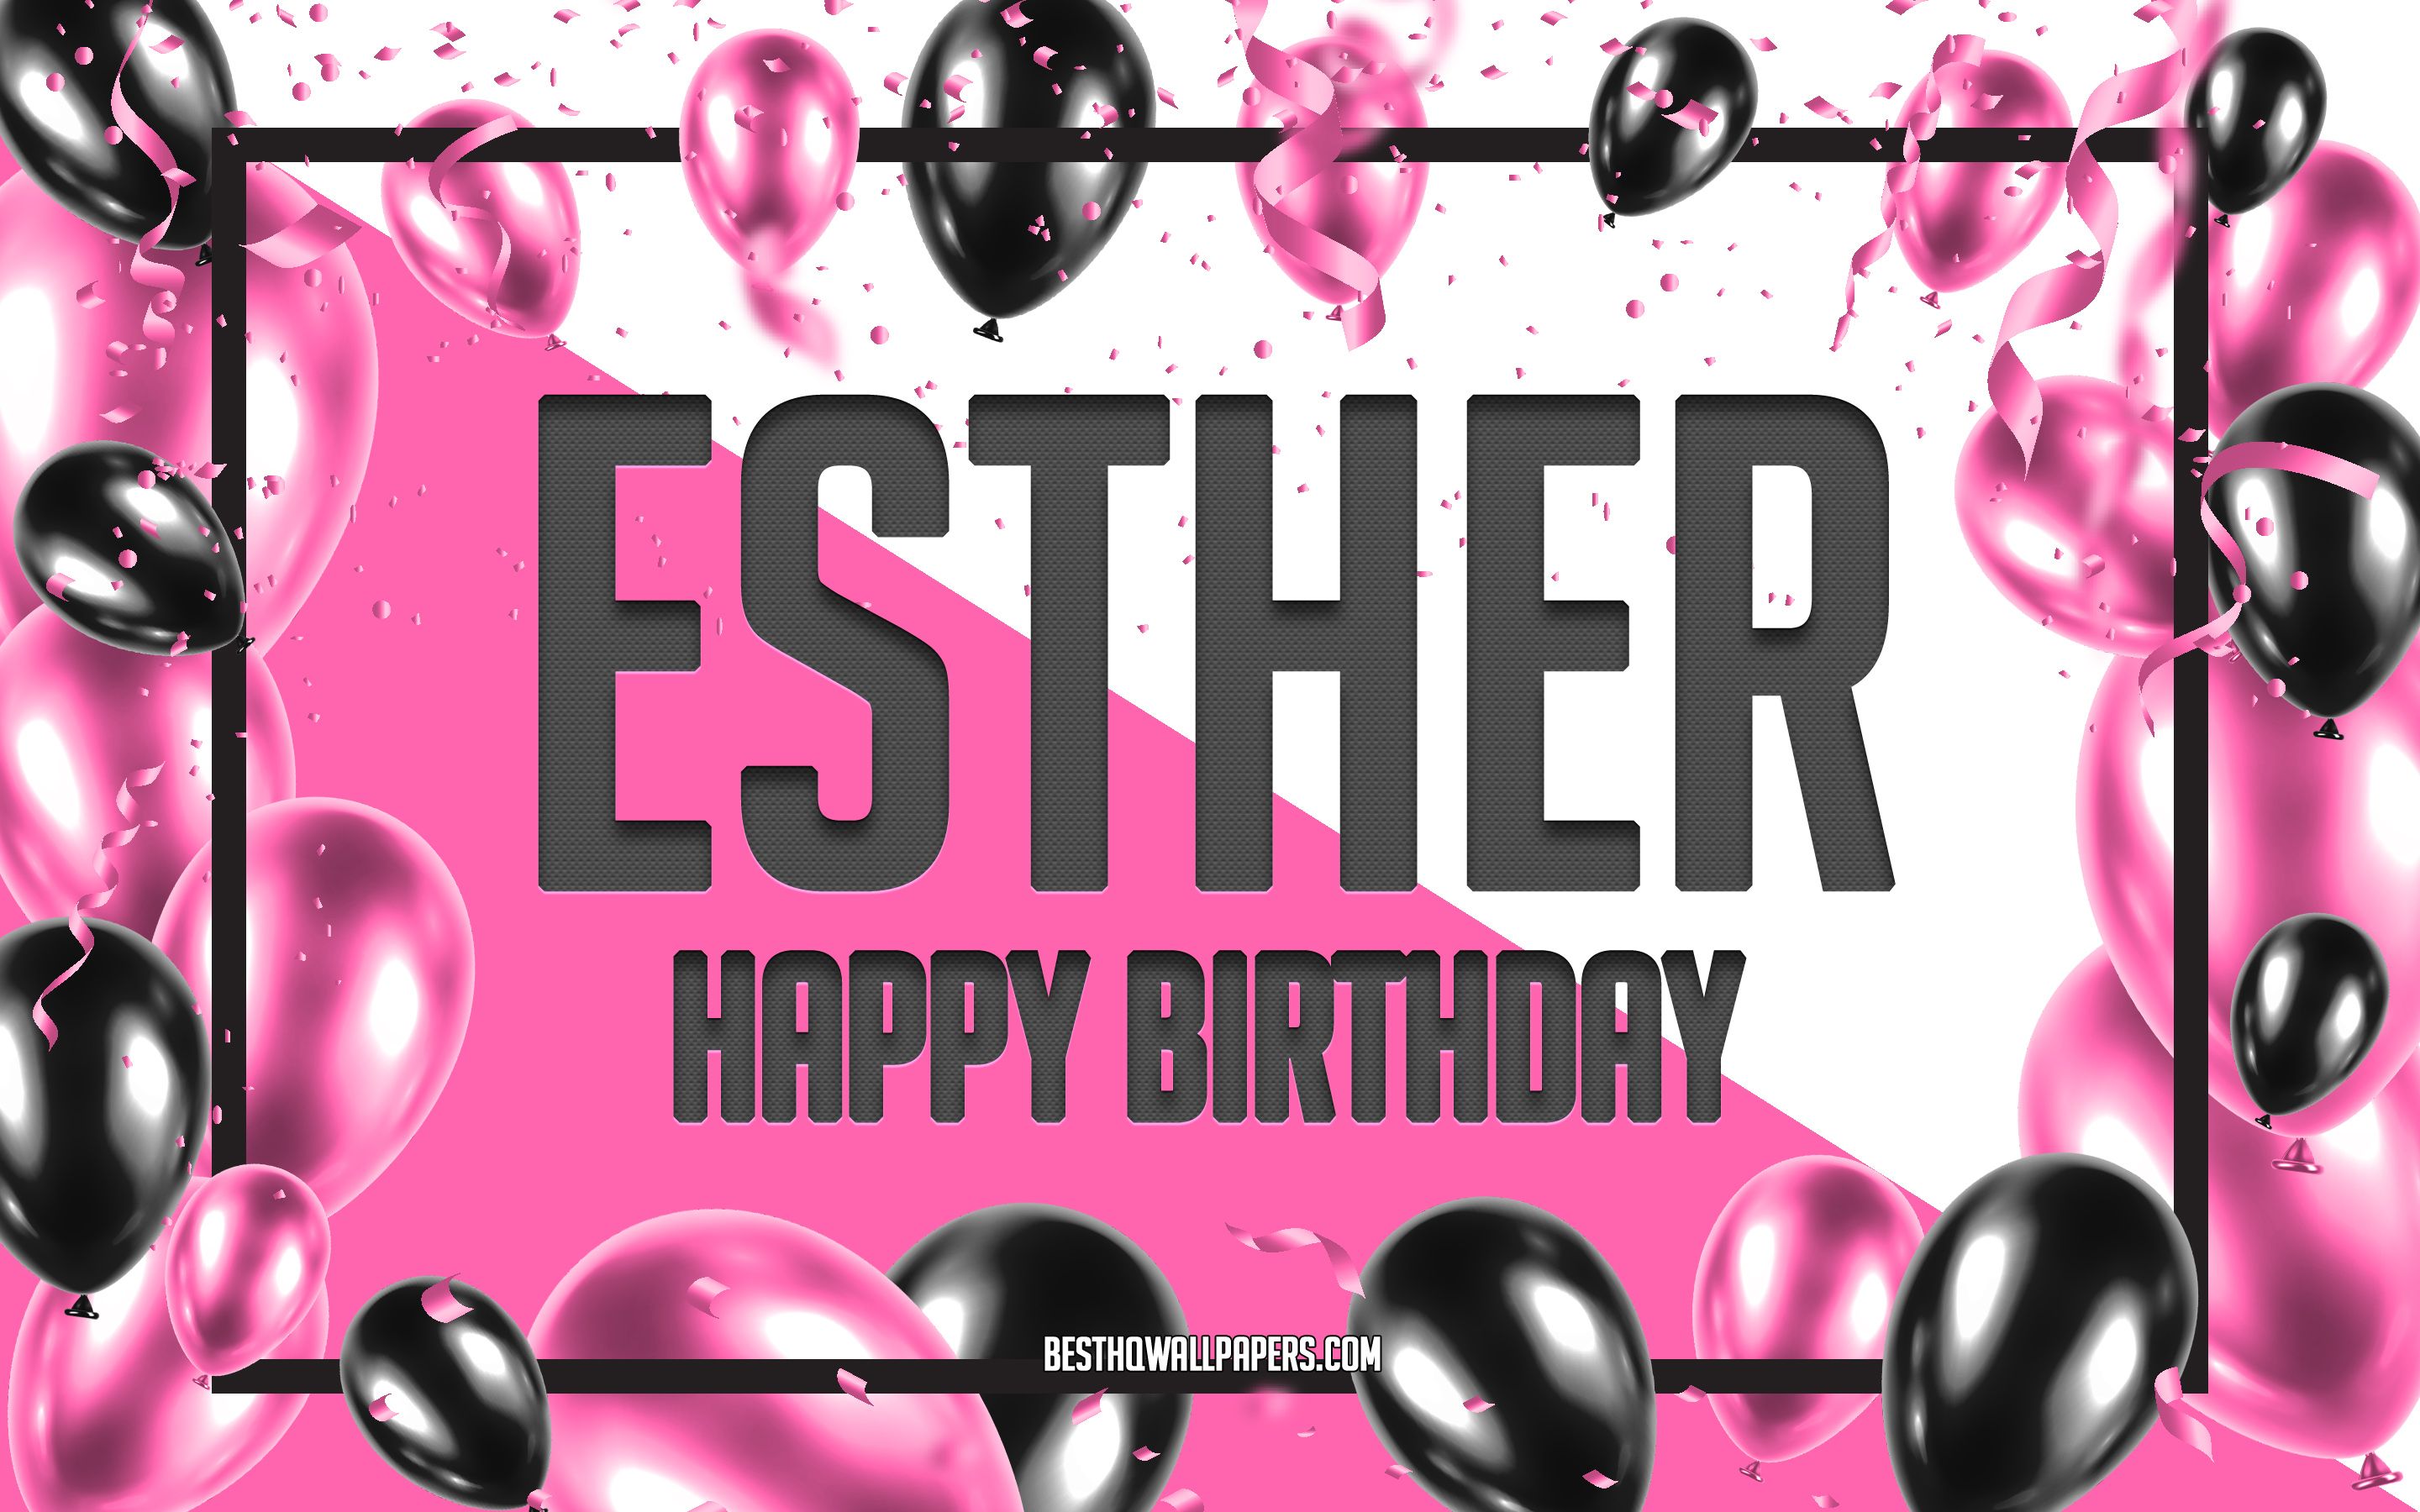 Download wallpaper Happy Birthday Esther, Birthday Balloons Background, Esther, wallpaper with names, Esther Happy Birthday, Pink Balloons Birthday Background, greeting card, Esther Birthday for desktop with resolution 2880x1800. High Quality HD picture